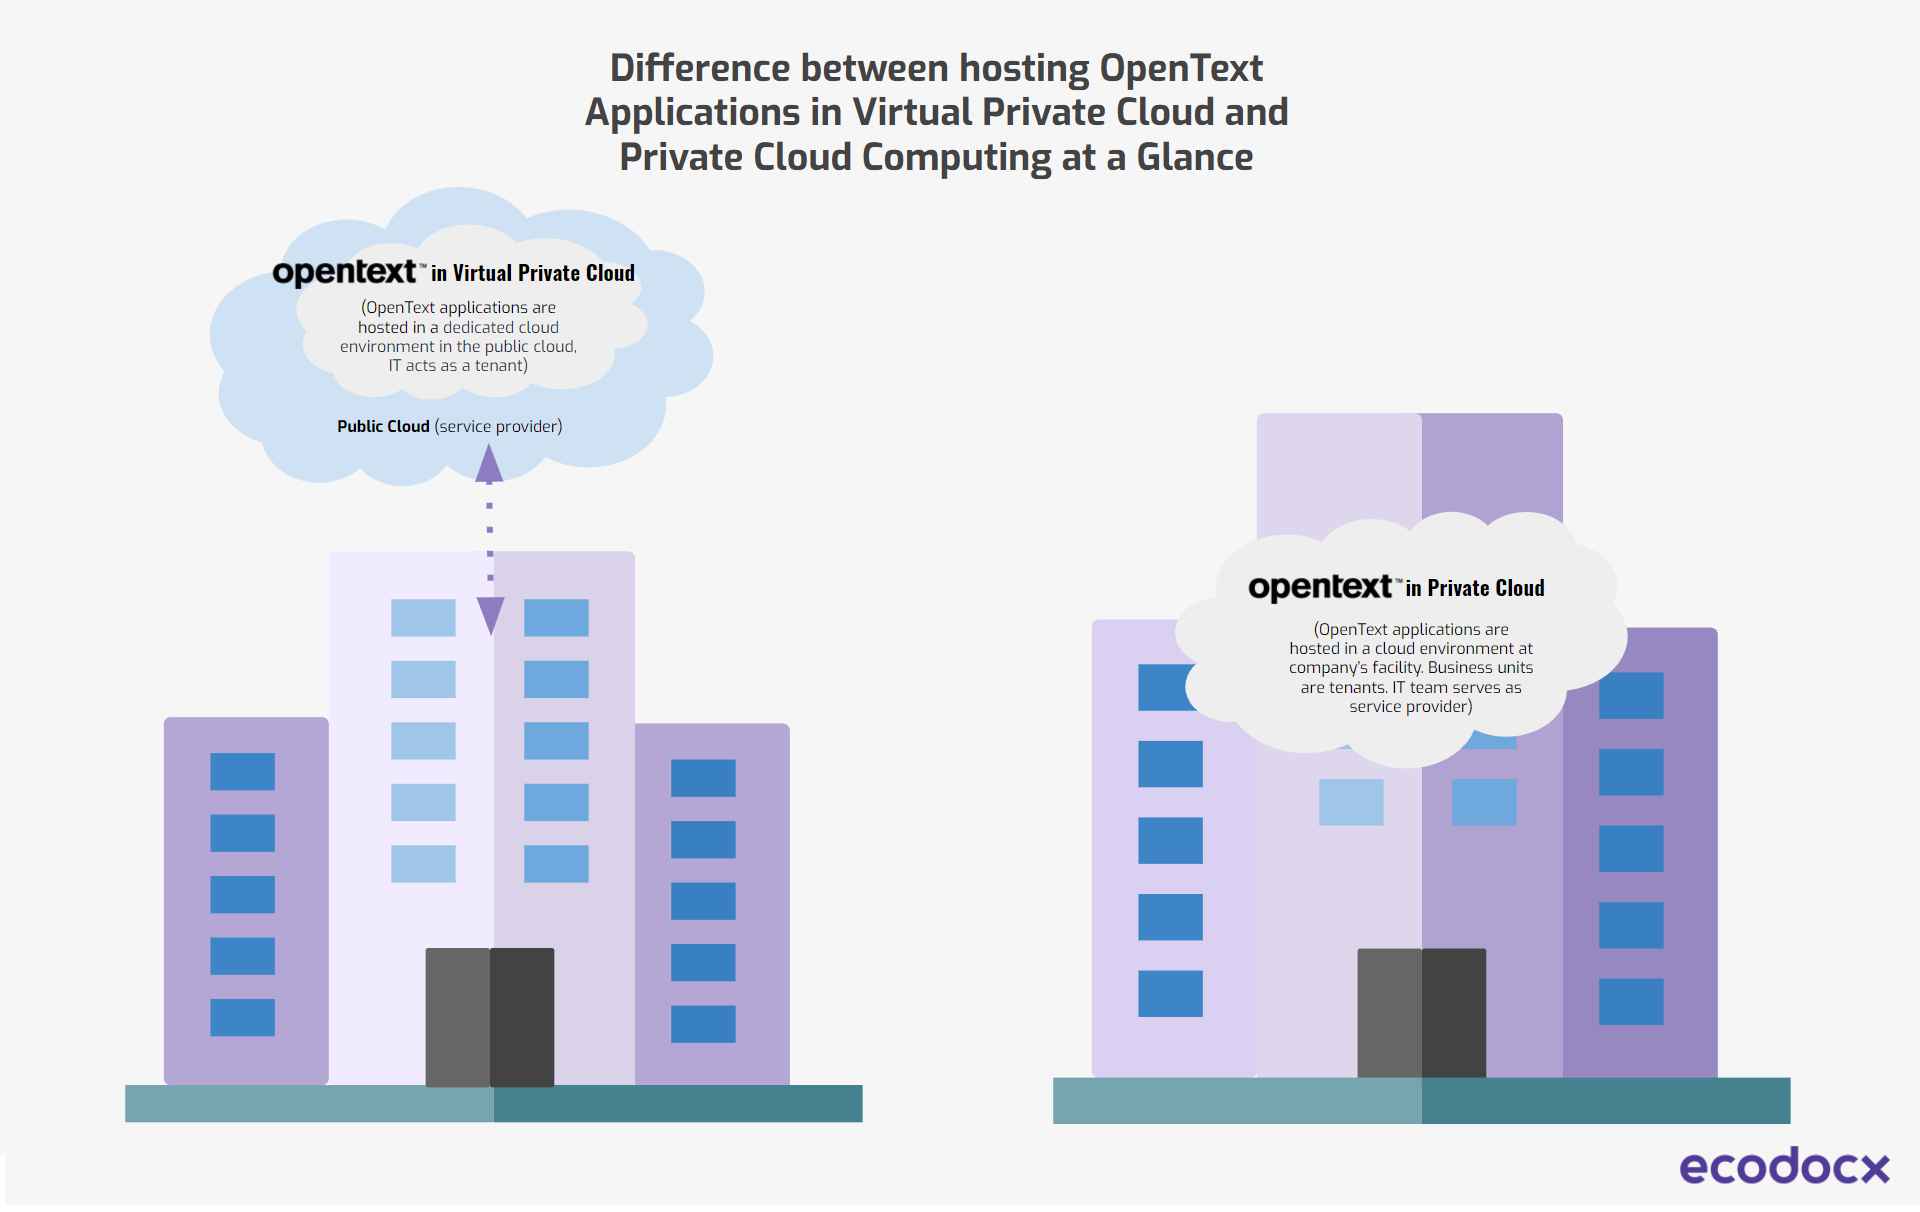 choosing hosting model for opentext solution private cloud or virtual private cloud; OpenText applications are hosted in a cloud environment at company’s facility. Business units are tenants. IT team serves as service provider; (OpenText applications are hosted in a dedicated cloud environment in the public cloud, IT acts as a tenant. Public Cloud is service provider